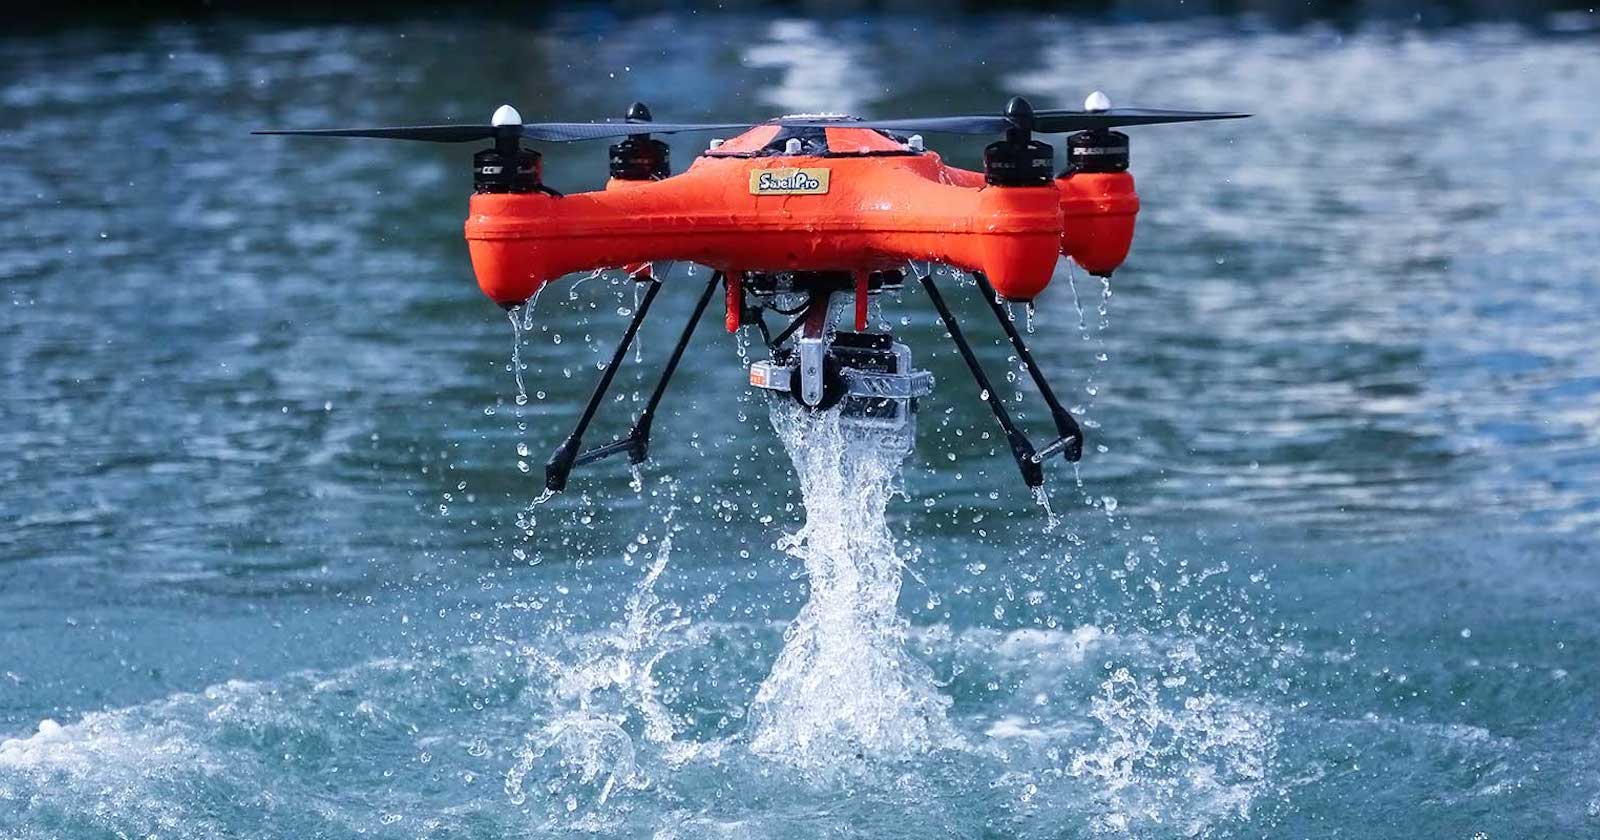  swellpro drones 